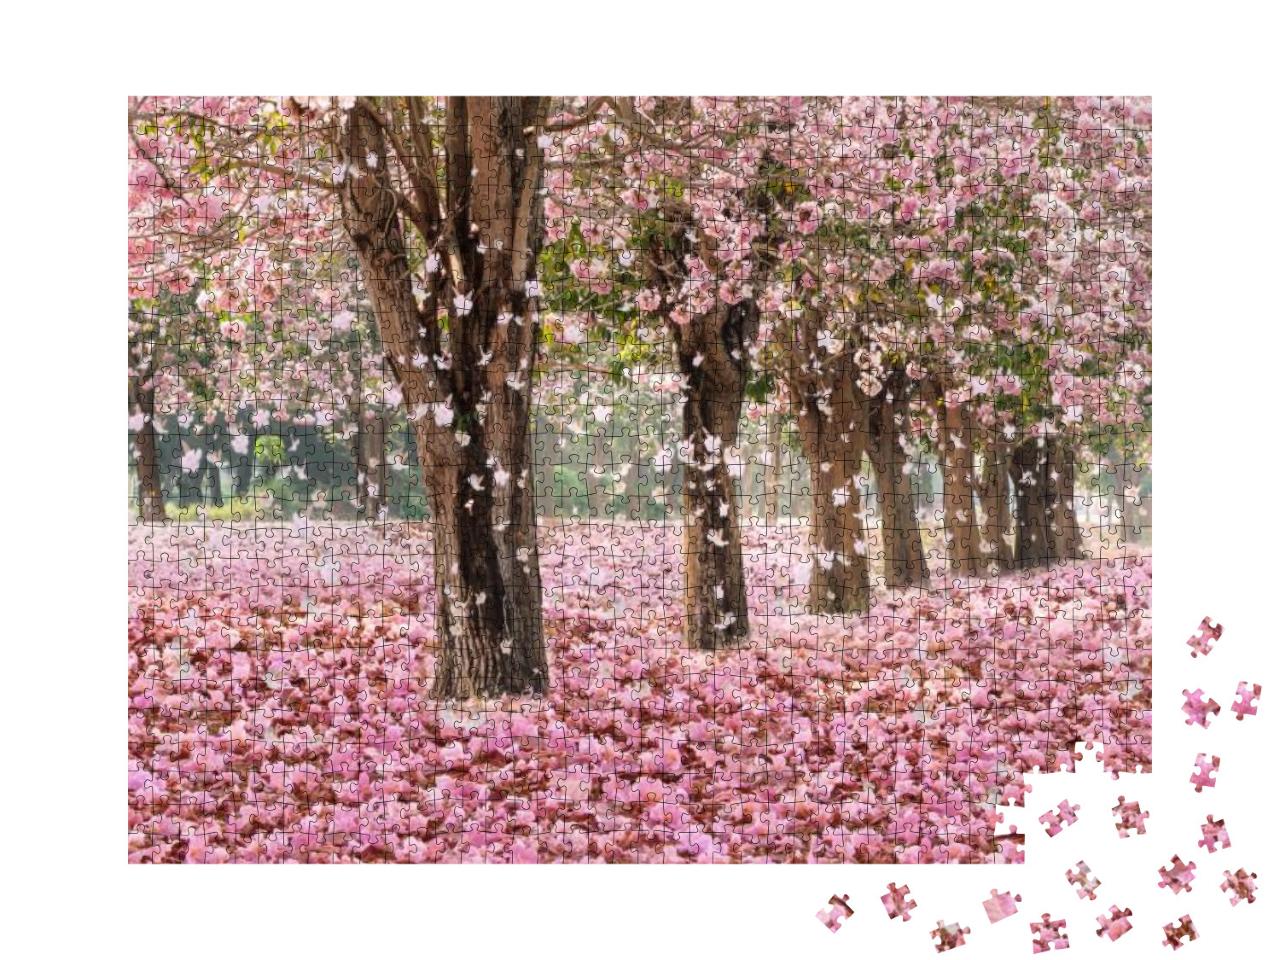 The Romantic Tunnel of Pink Flower Trees with Falling Pet... Jigsaw Puzzle with 1000 pieces